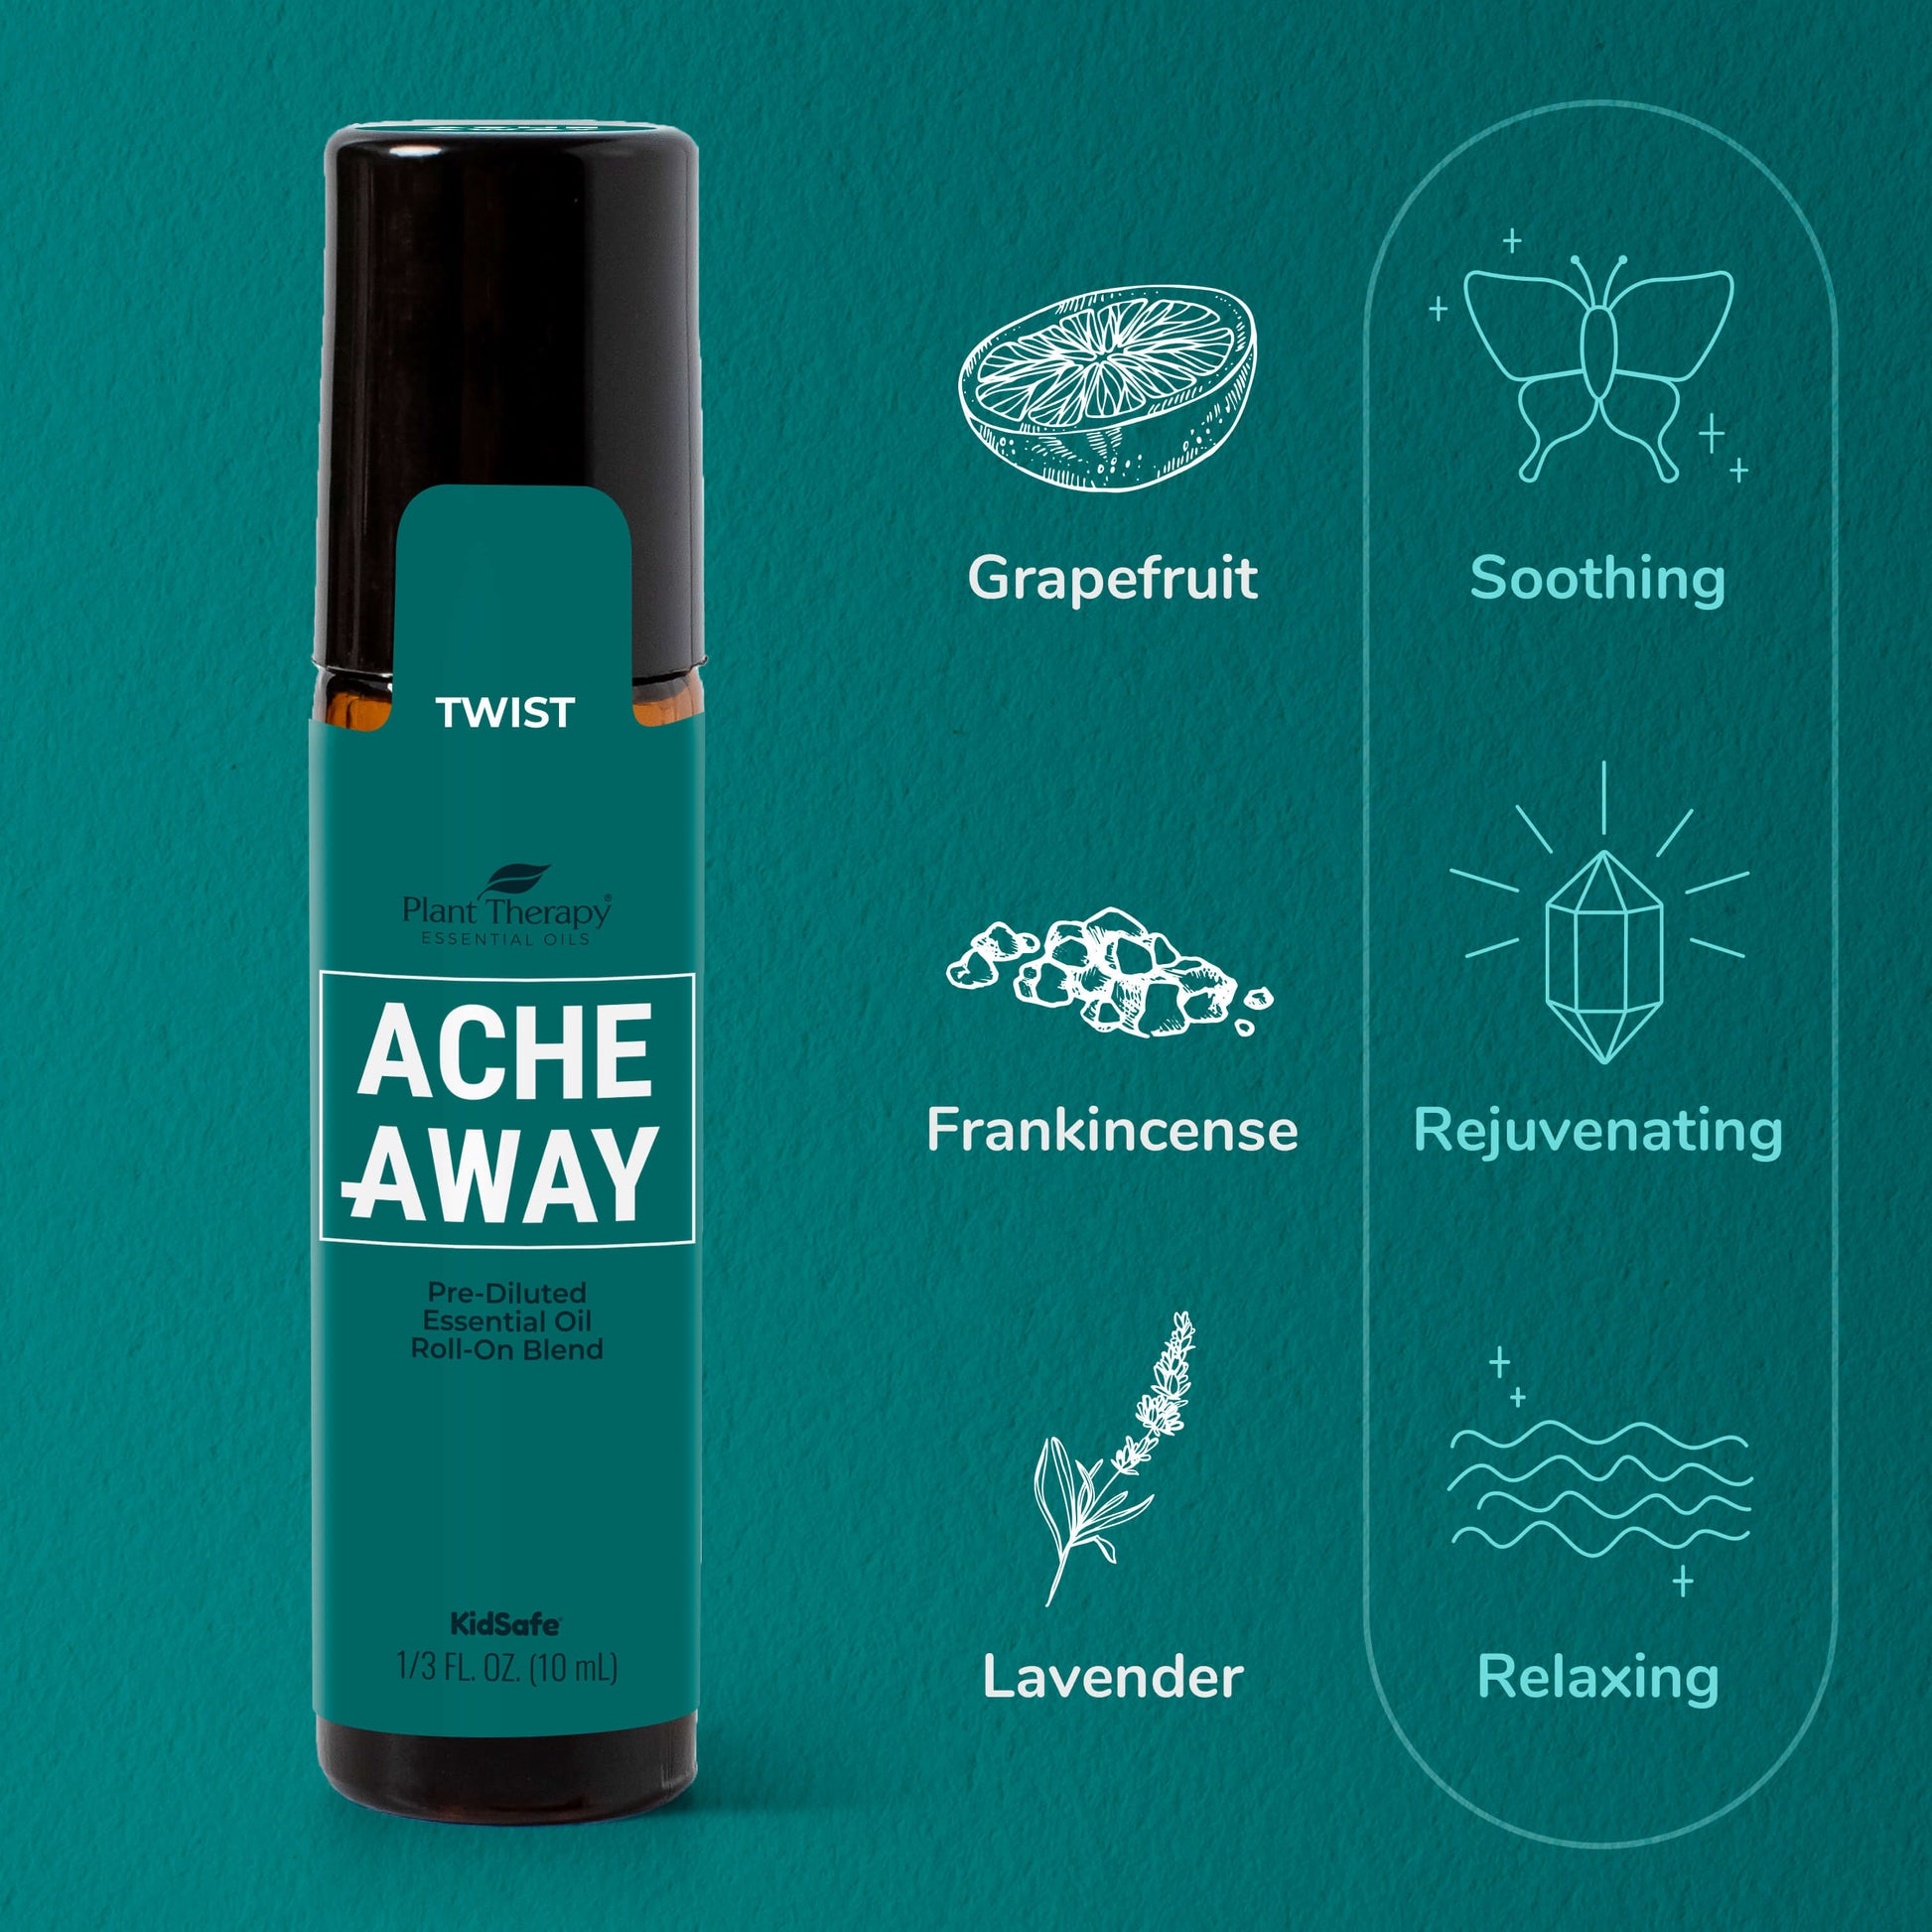 ACHE AWAY ESSENTIAL OIL ROLL ON | Joy of Oiling - Plant Therapy Malaysia | The Nature of Things Malaysia